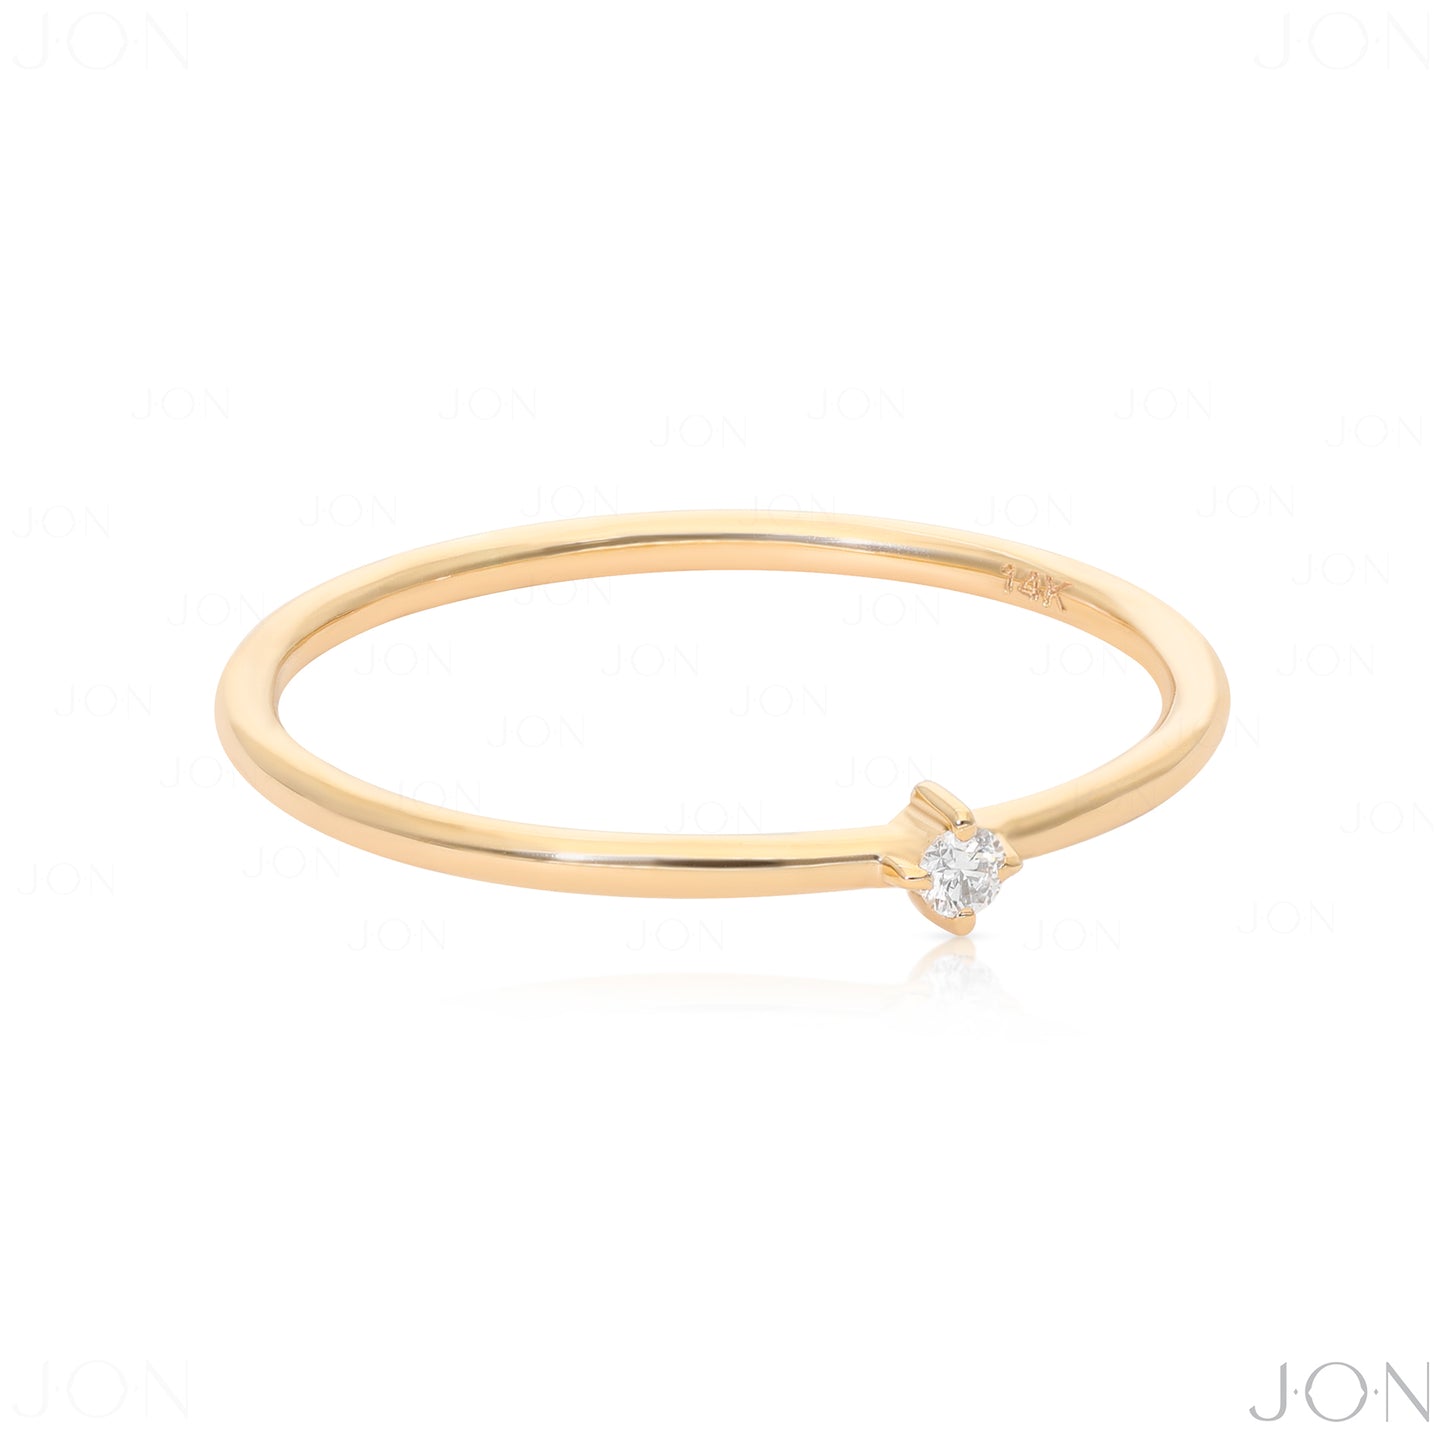 14K Gold 0.02 Ct. Solitaire Genuine Diamond Engagement Ring Fine Jewelry